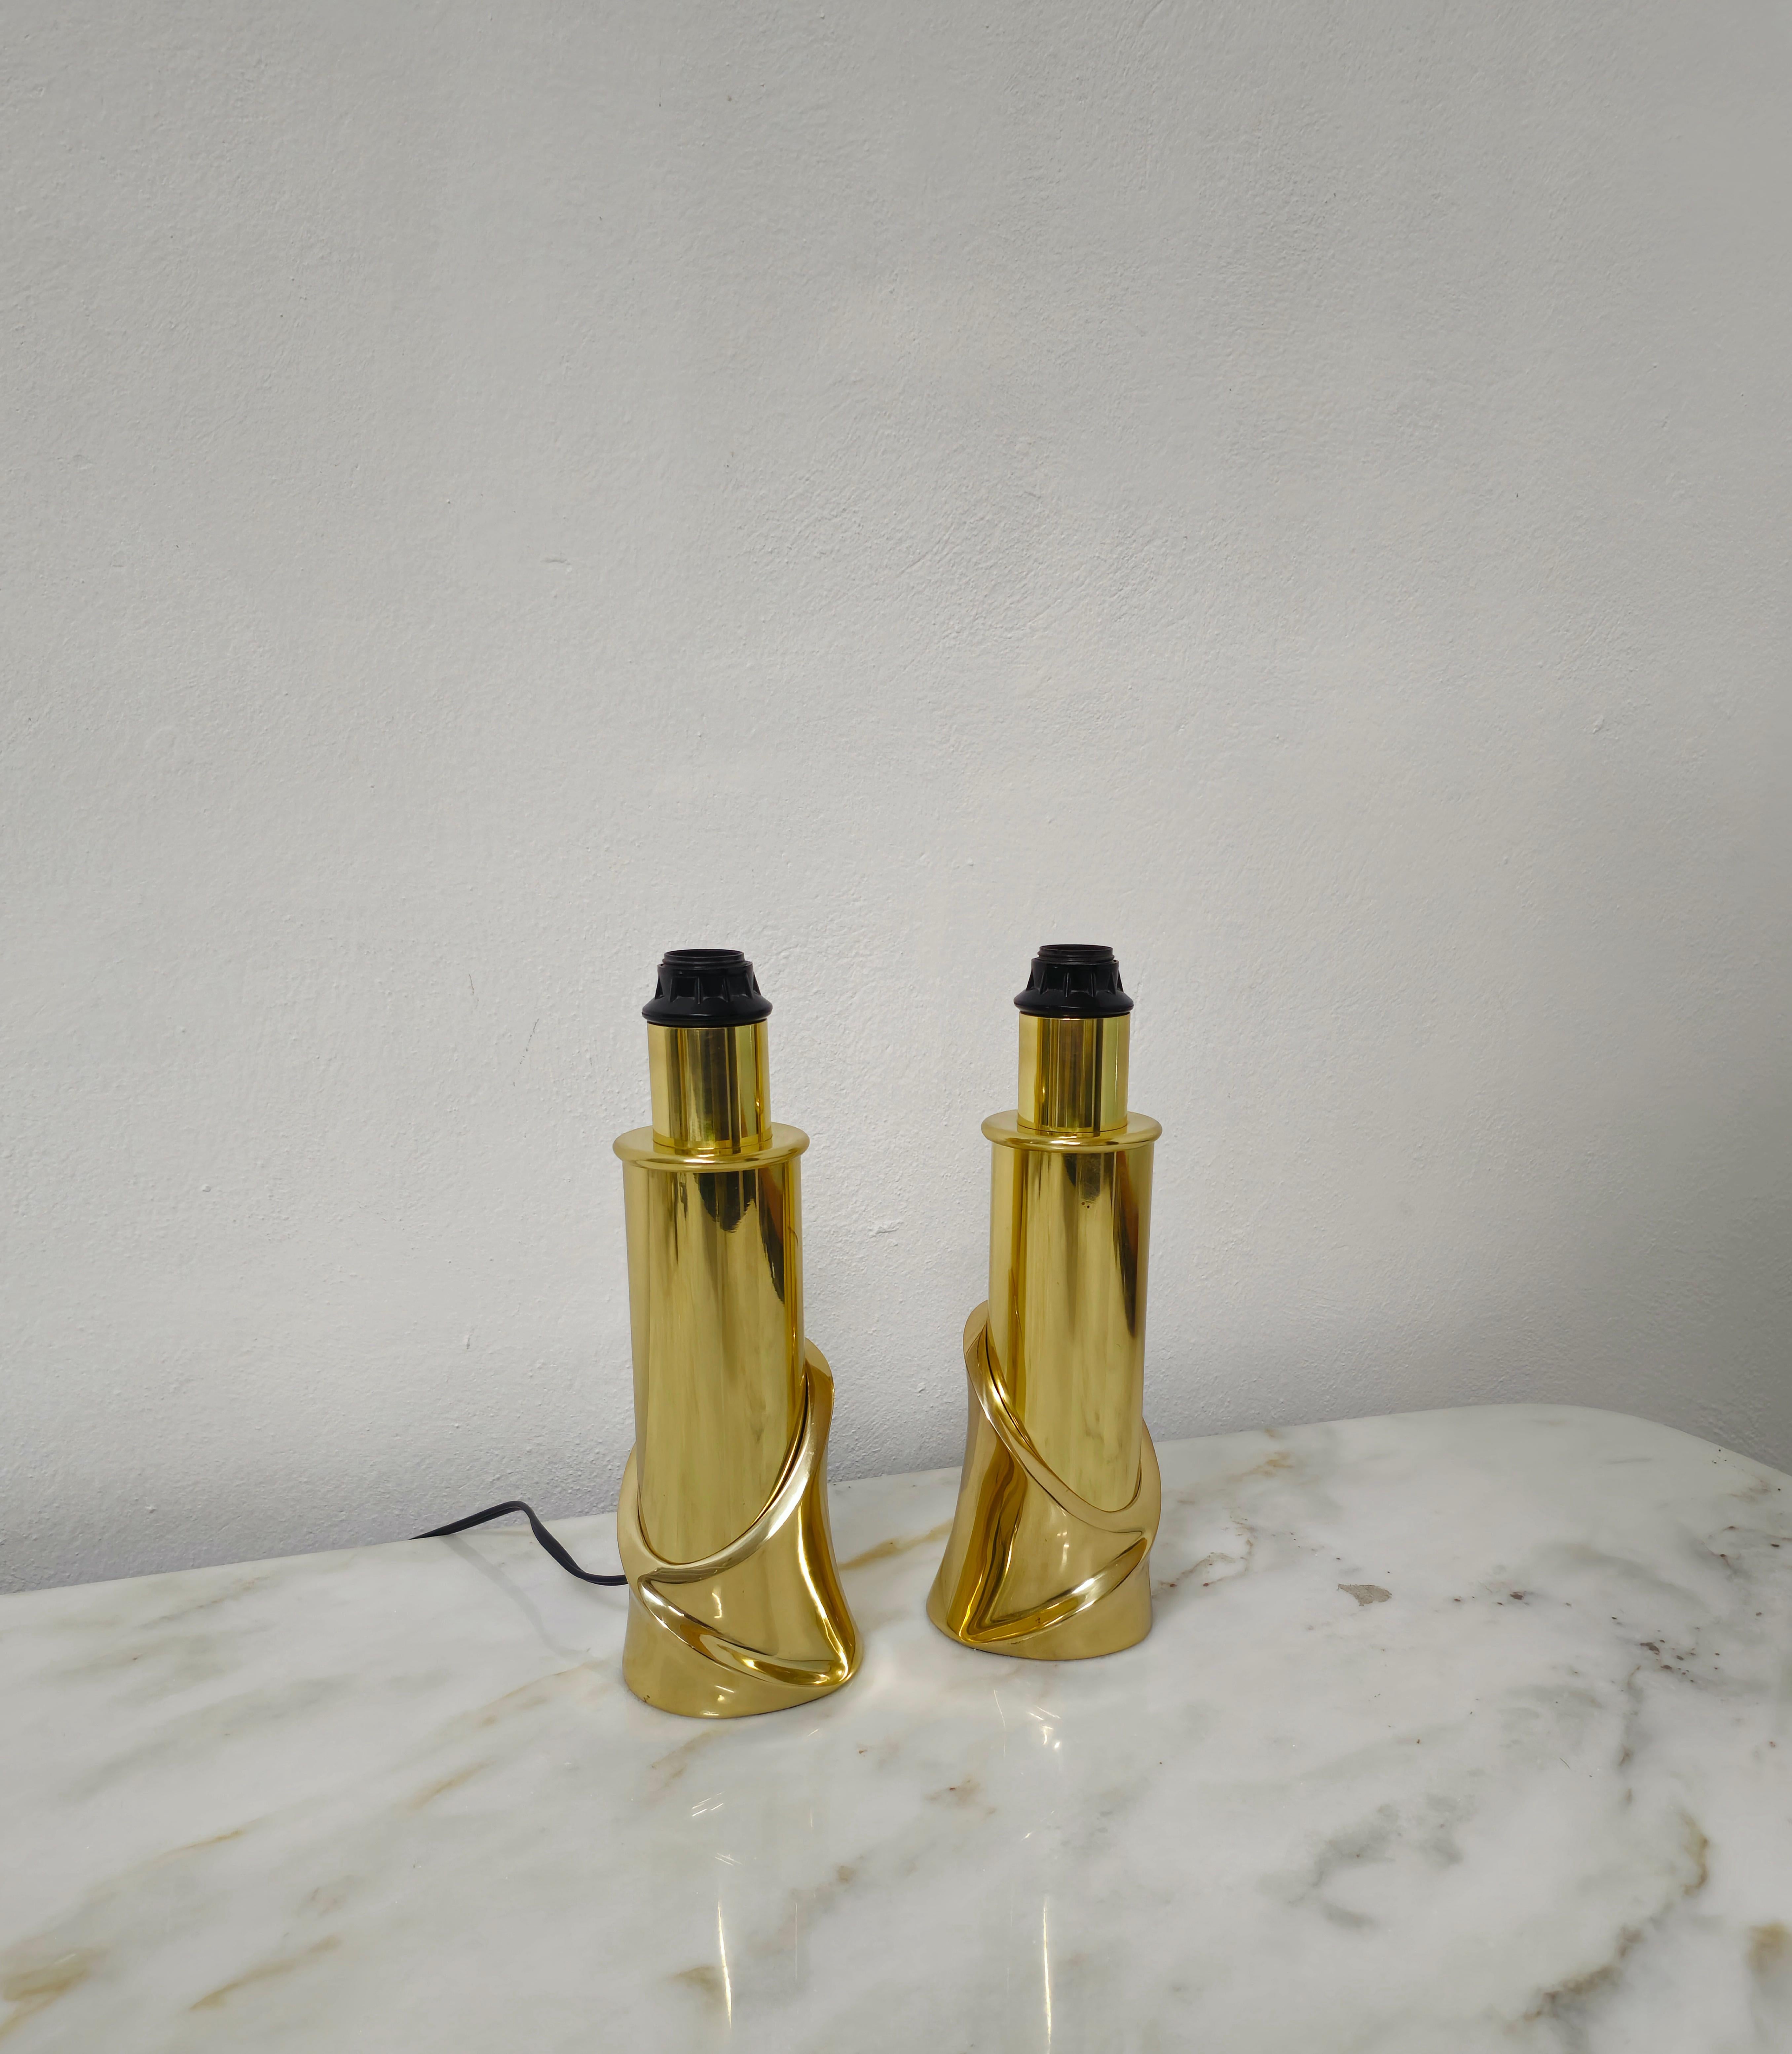 Polished Pair of Table Lamps Bedside Lamps Brass Luciano Frigerio Italian Design 1970s  For Sale